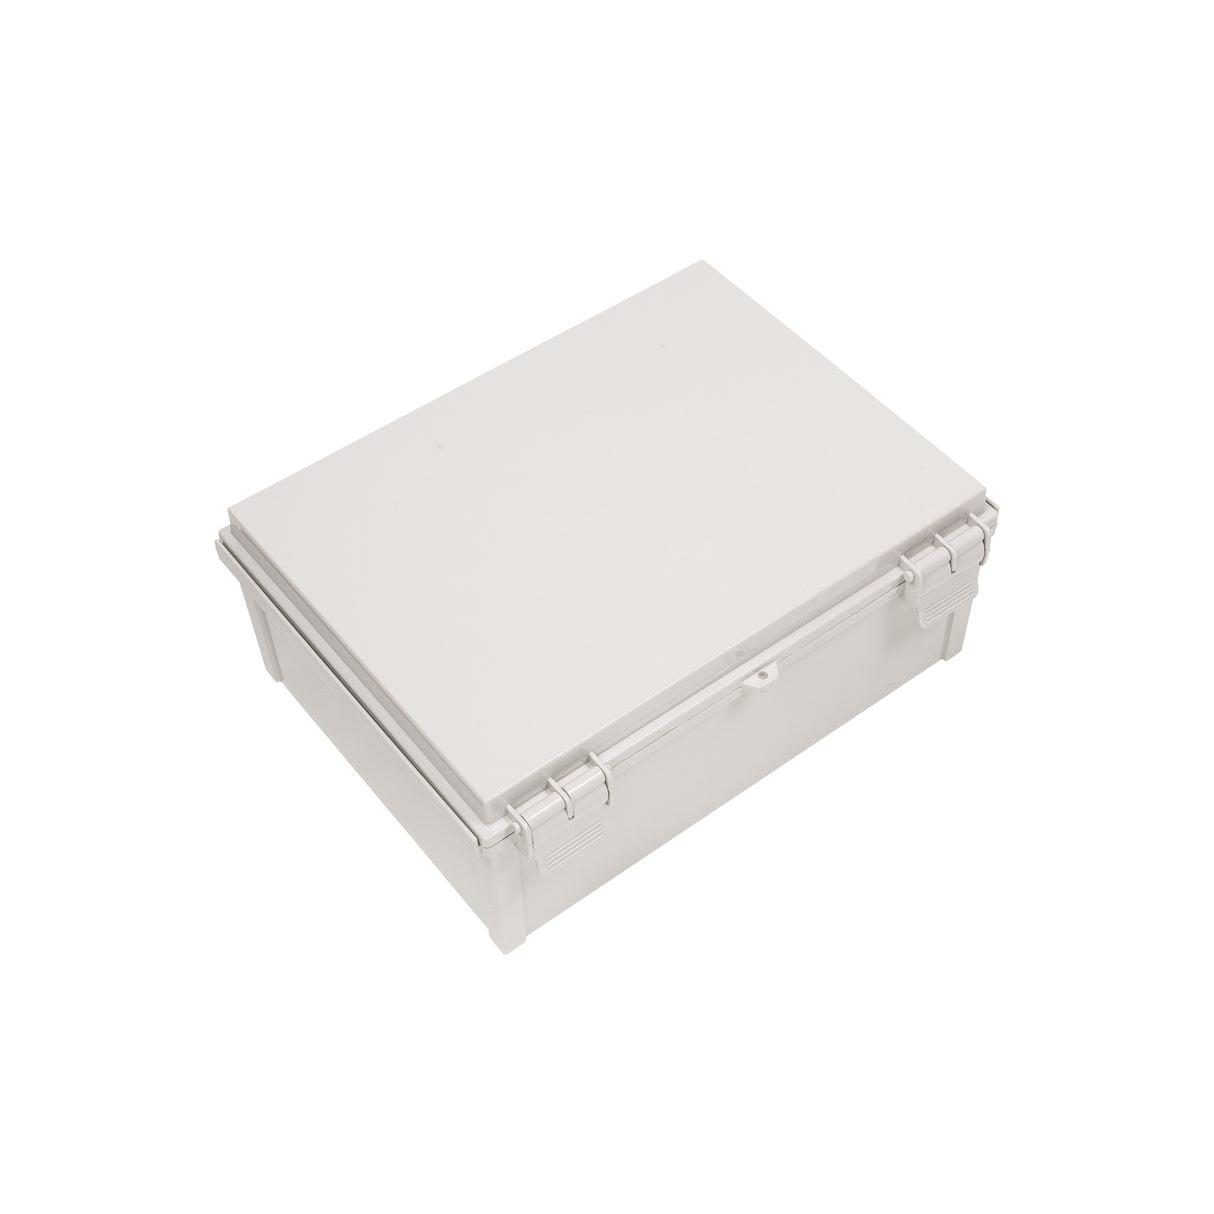 Boxco Q-Series 300x400x150mm Plastic Enclosure, IP67, IK08, ABS, Grey Cover, Hinge Type with Plate - PHOTO 1